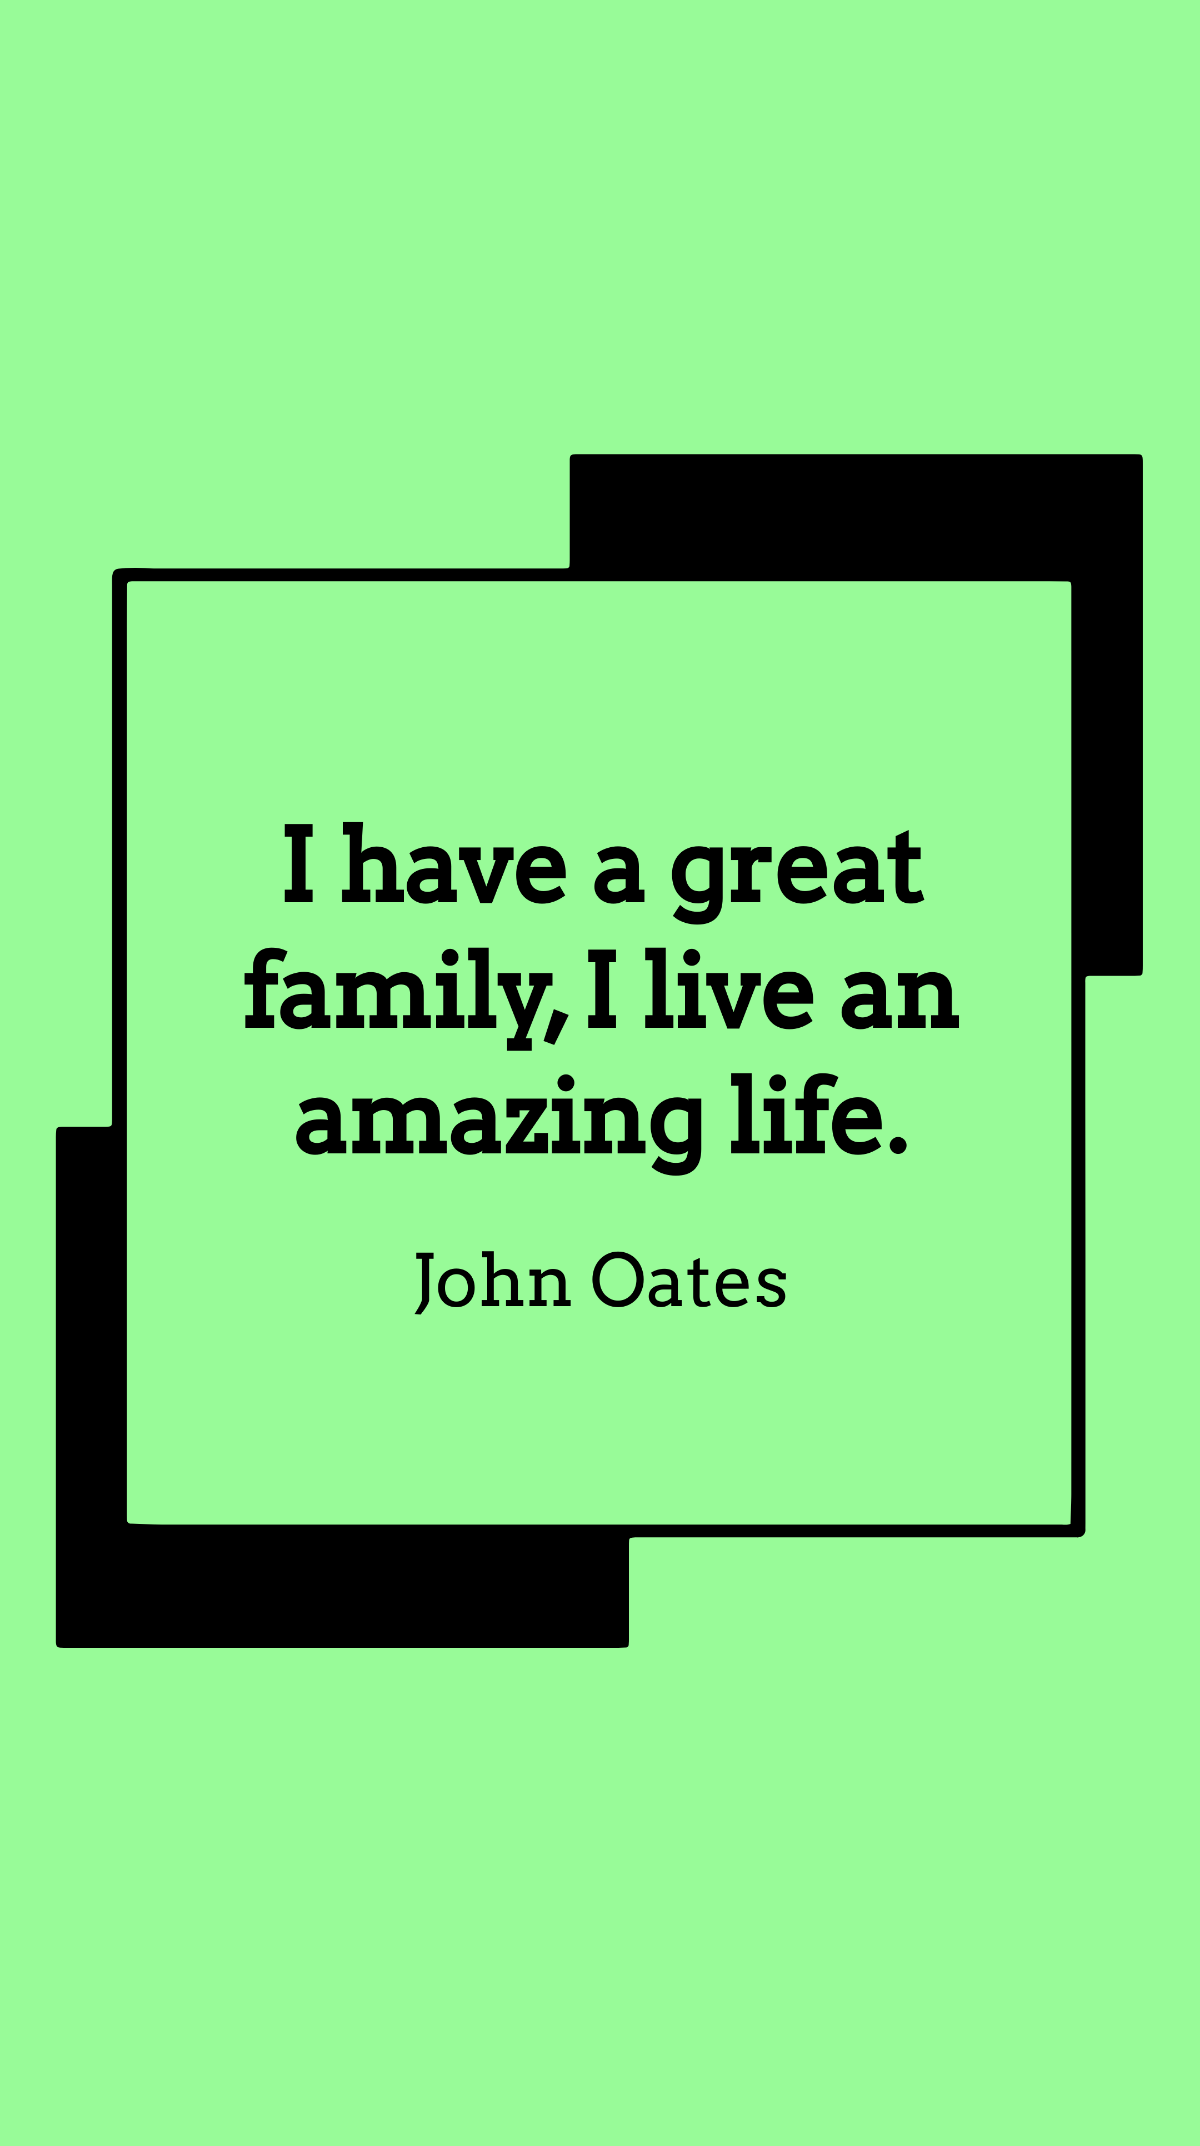 Free John Oates - I have a great family, I live an amazing life. Template